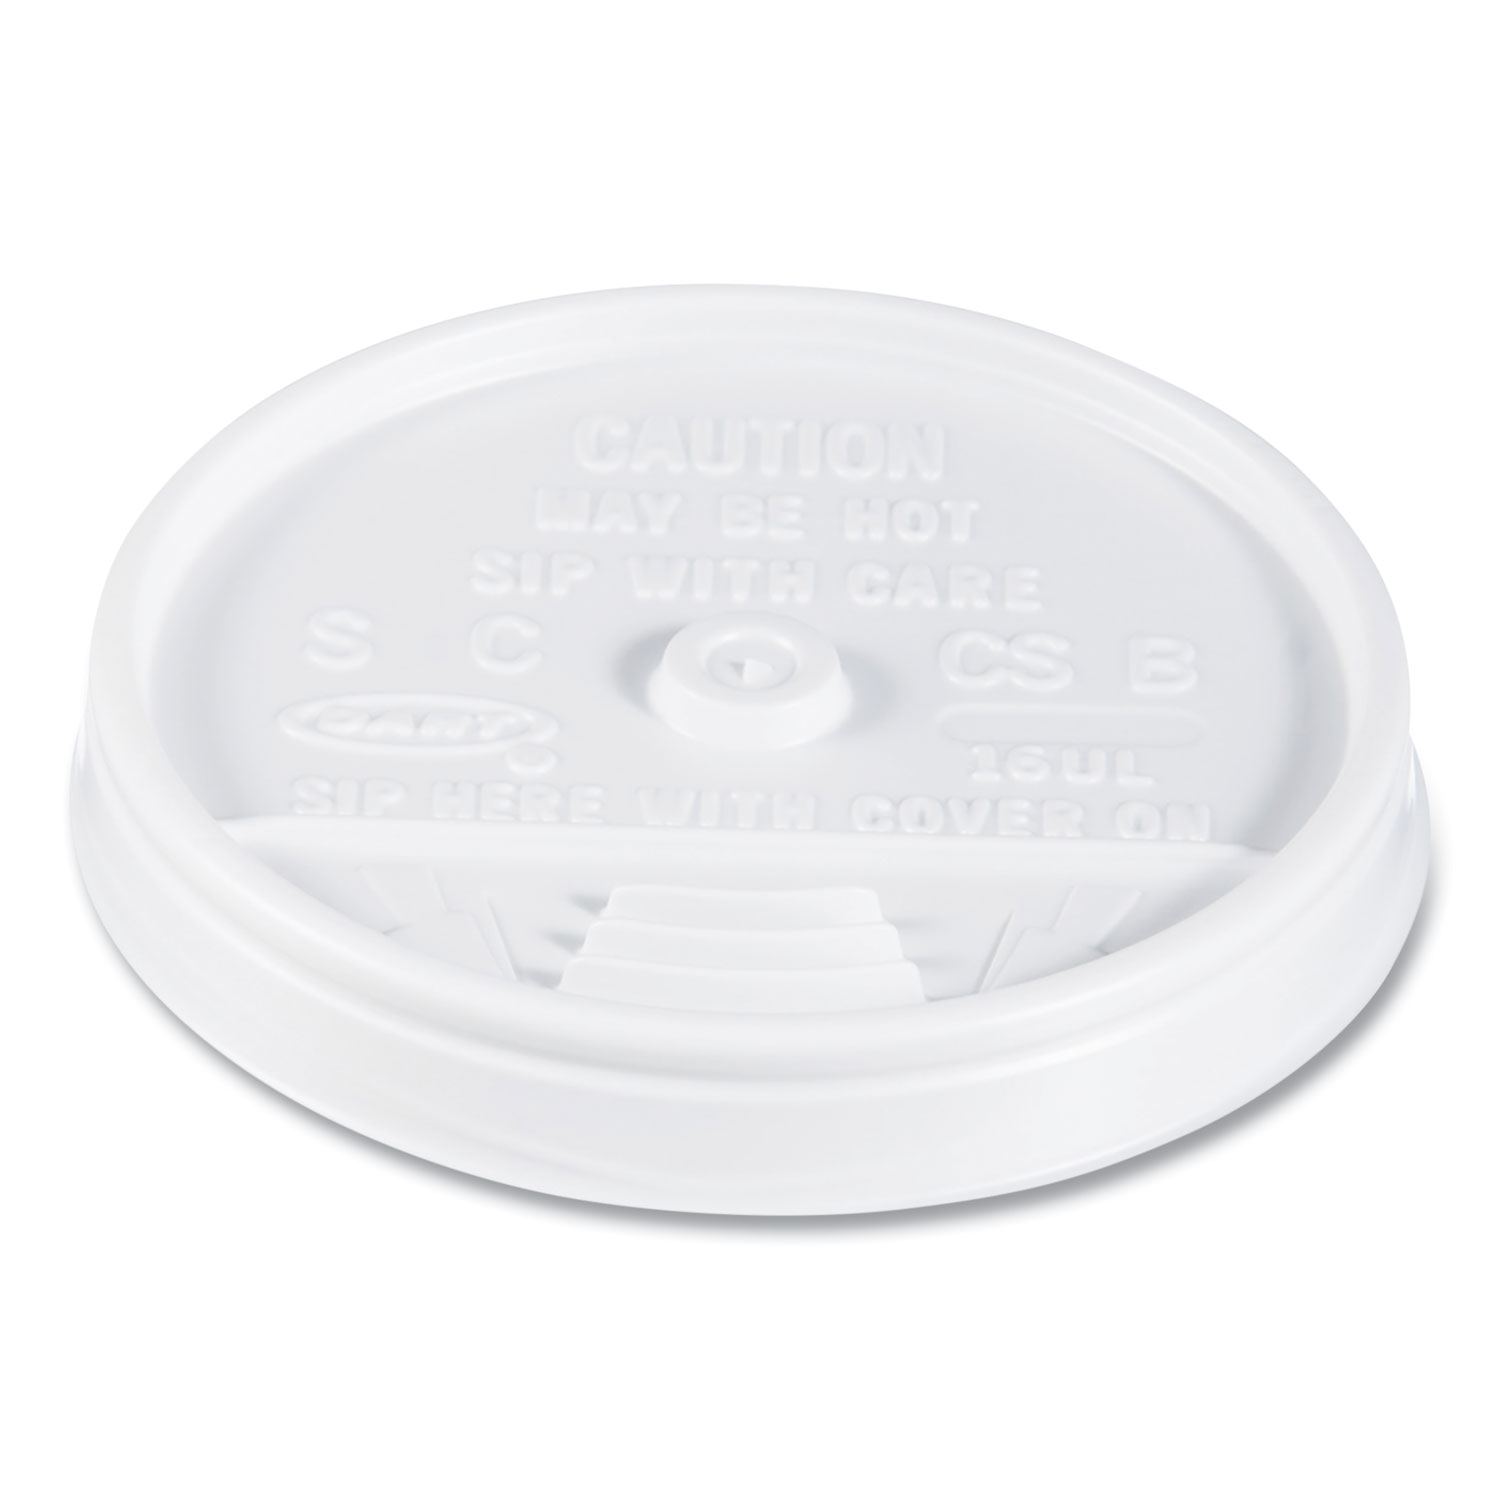 White Plastic 2-in-1 Straw or Sip Coffee Cup Lid - Fits 8, 12, 16 and 20 oz  - 100 count box